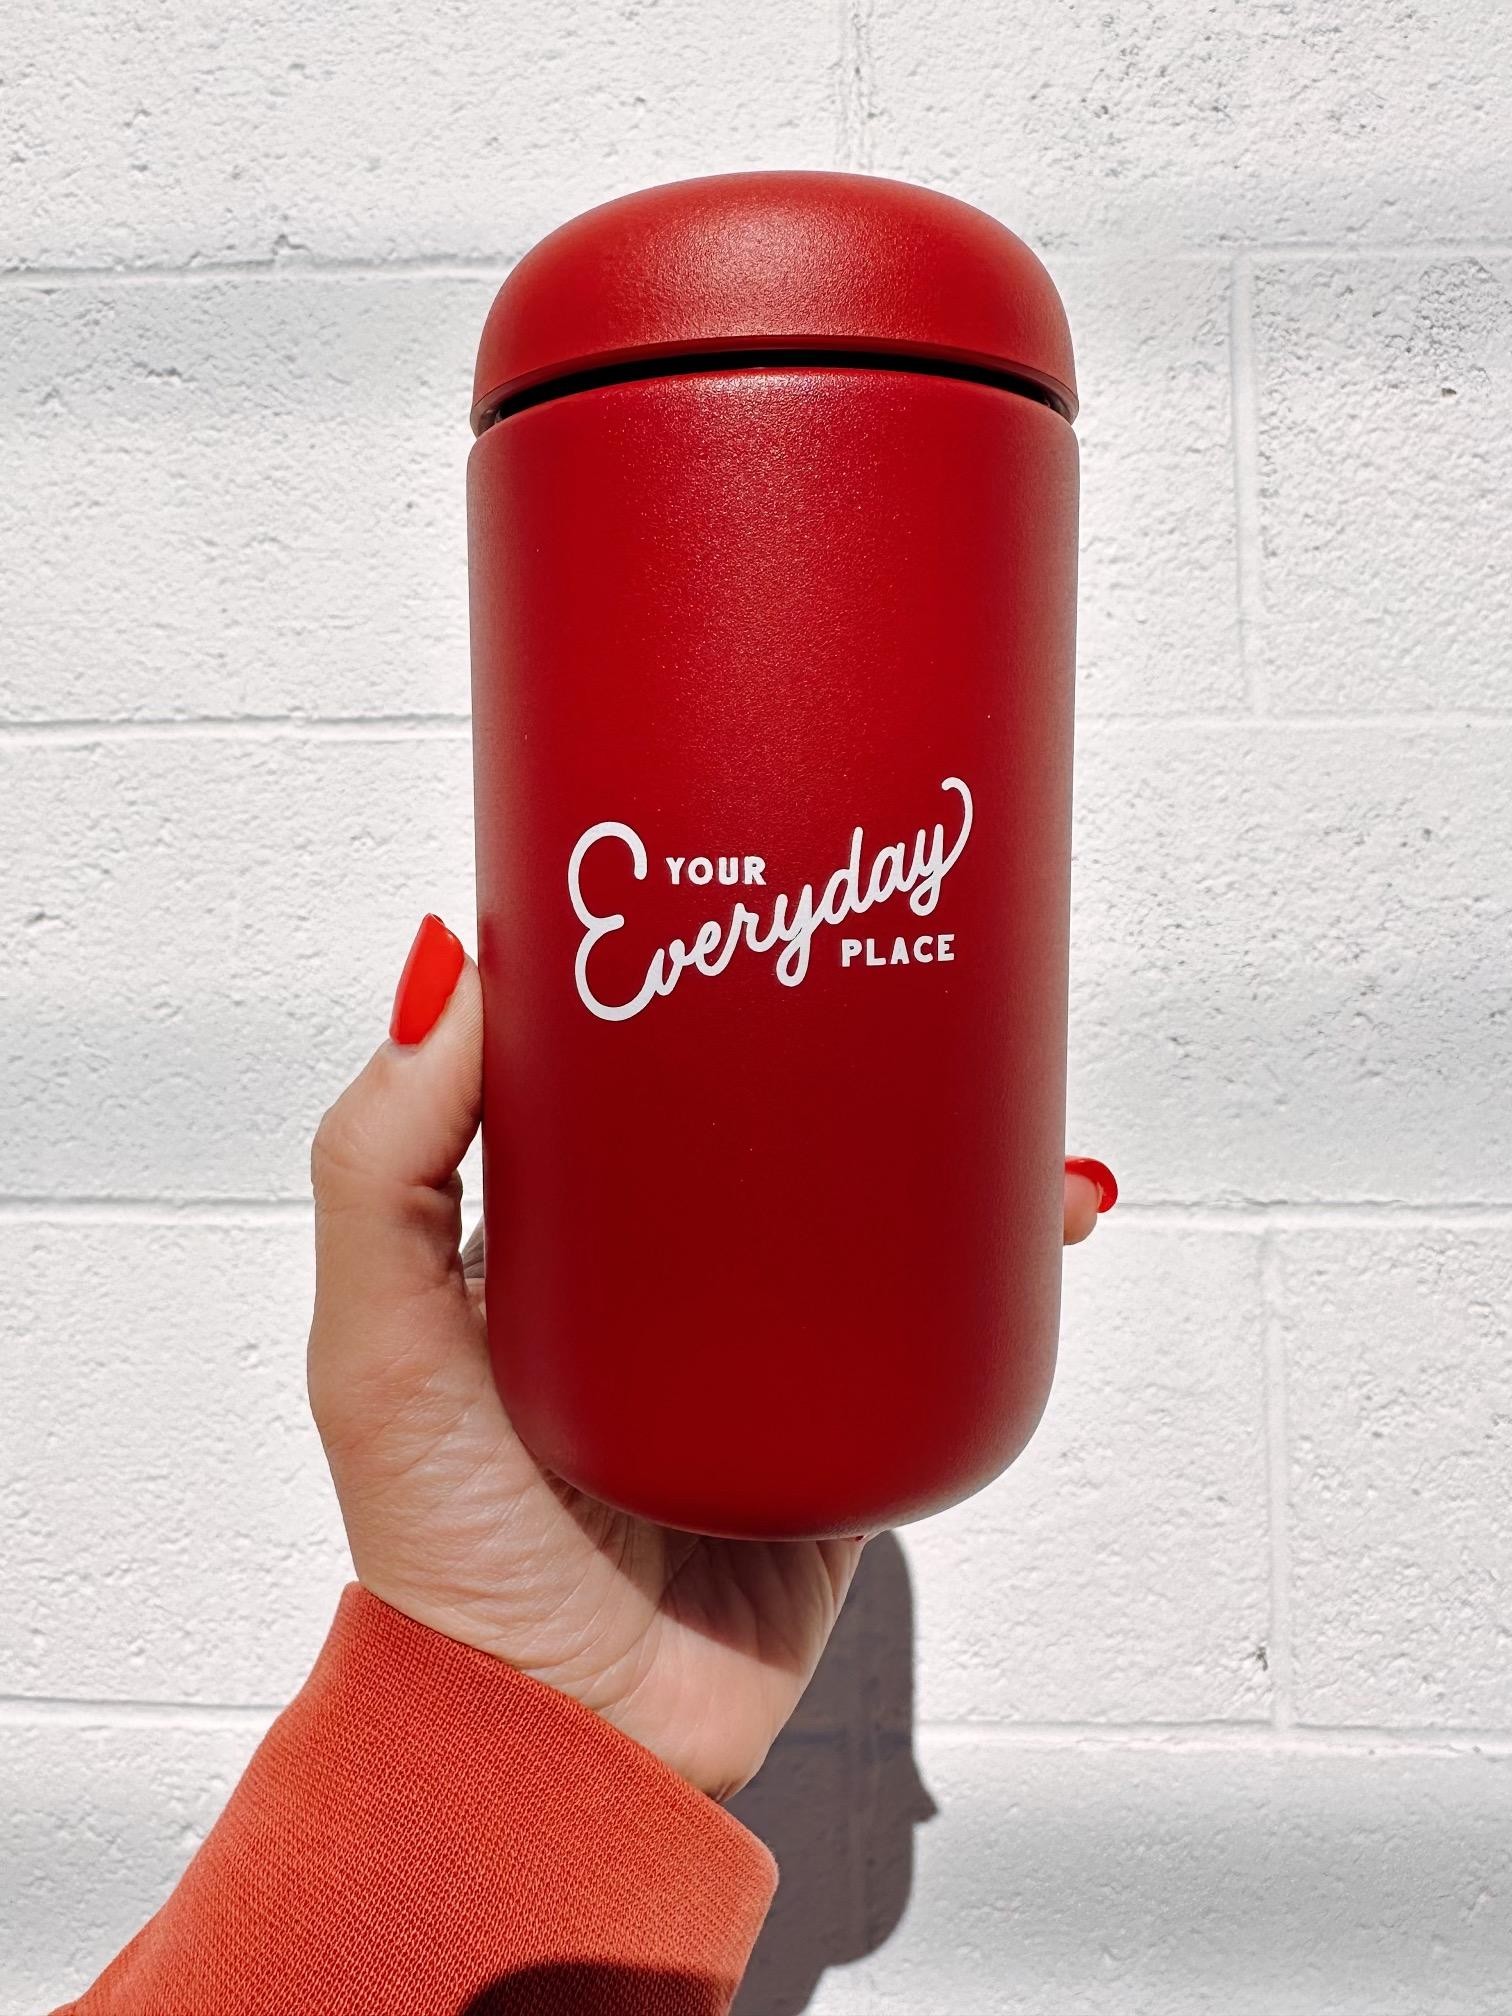 Red Fellow "Your Everyday Place" Mug